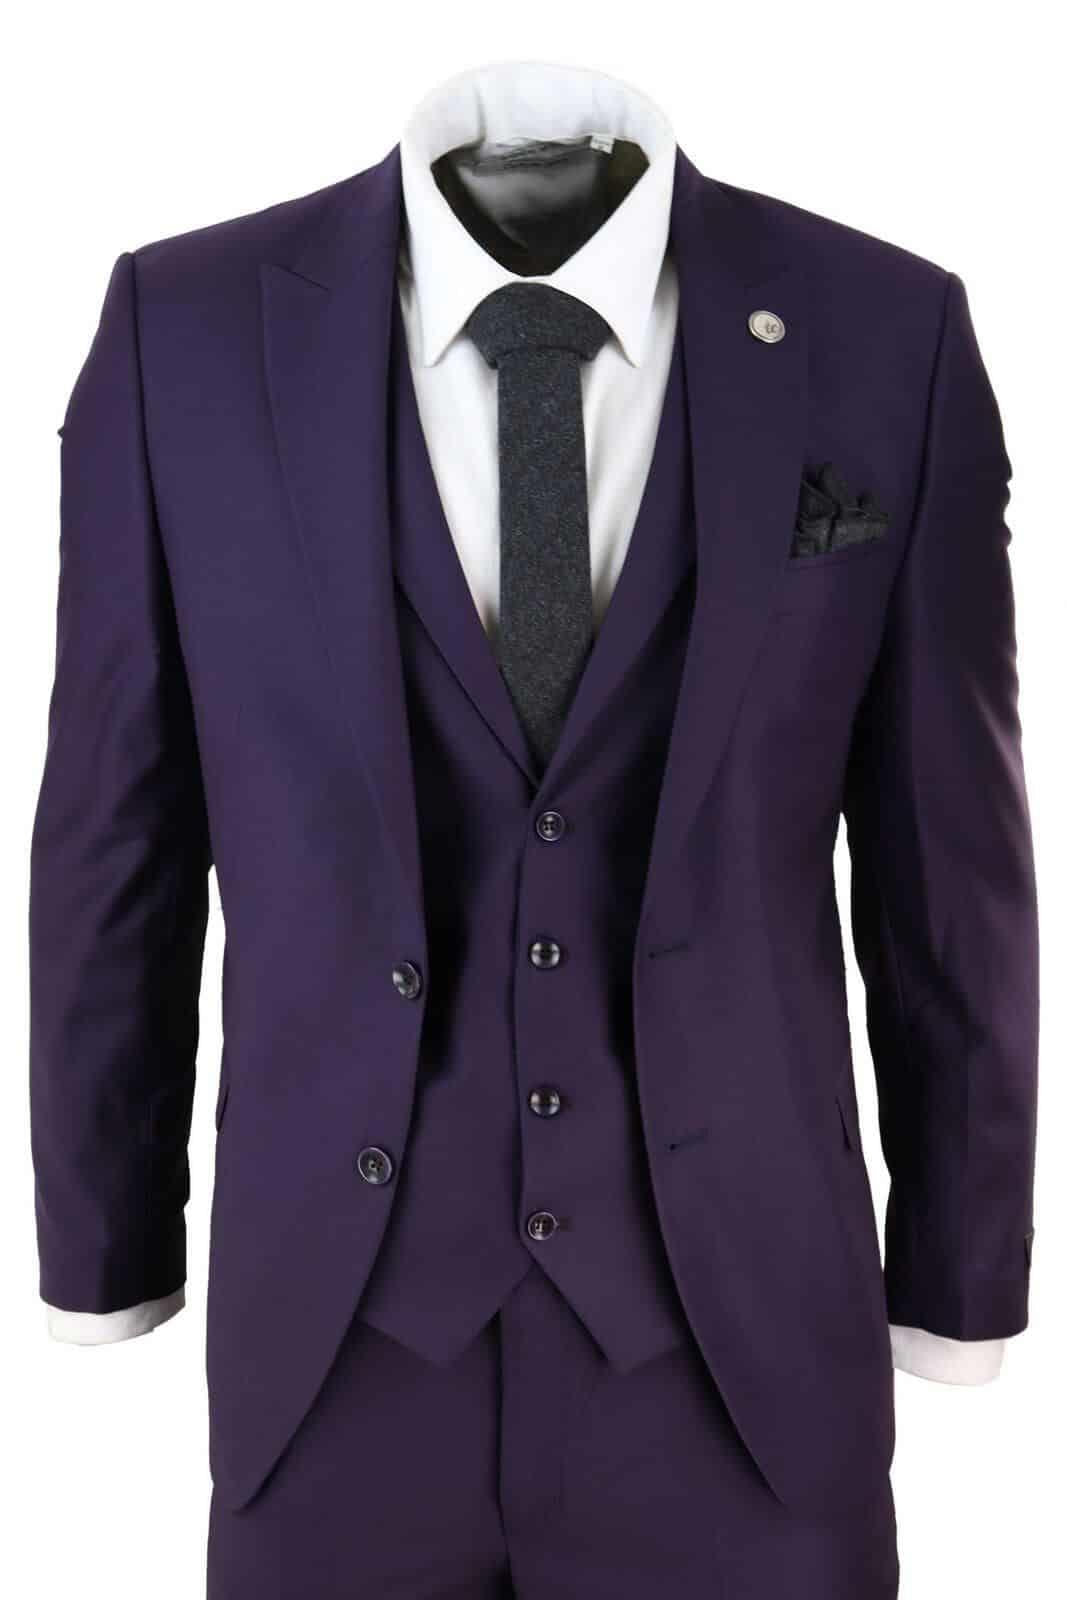 New Mens 3 Piece Suit Plain Purple Classic Tailored Fit Smart Casual 1920s Formal - Upperclass Fashions 